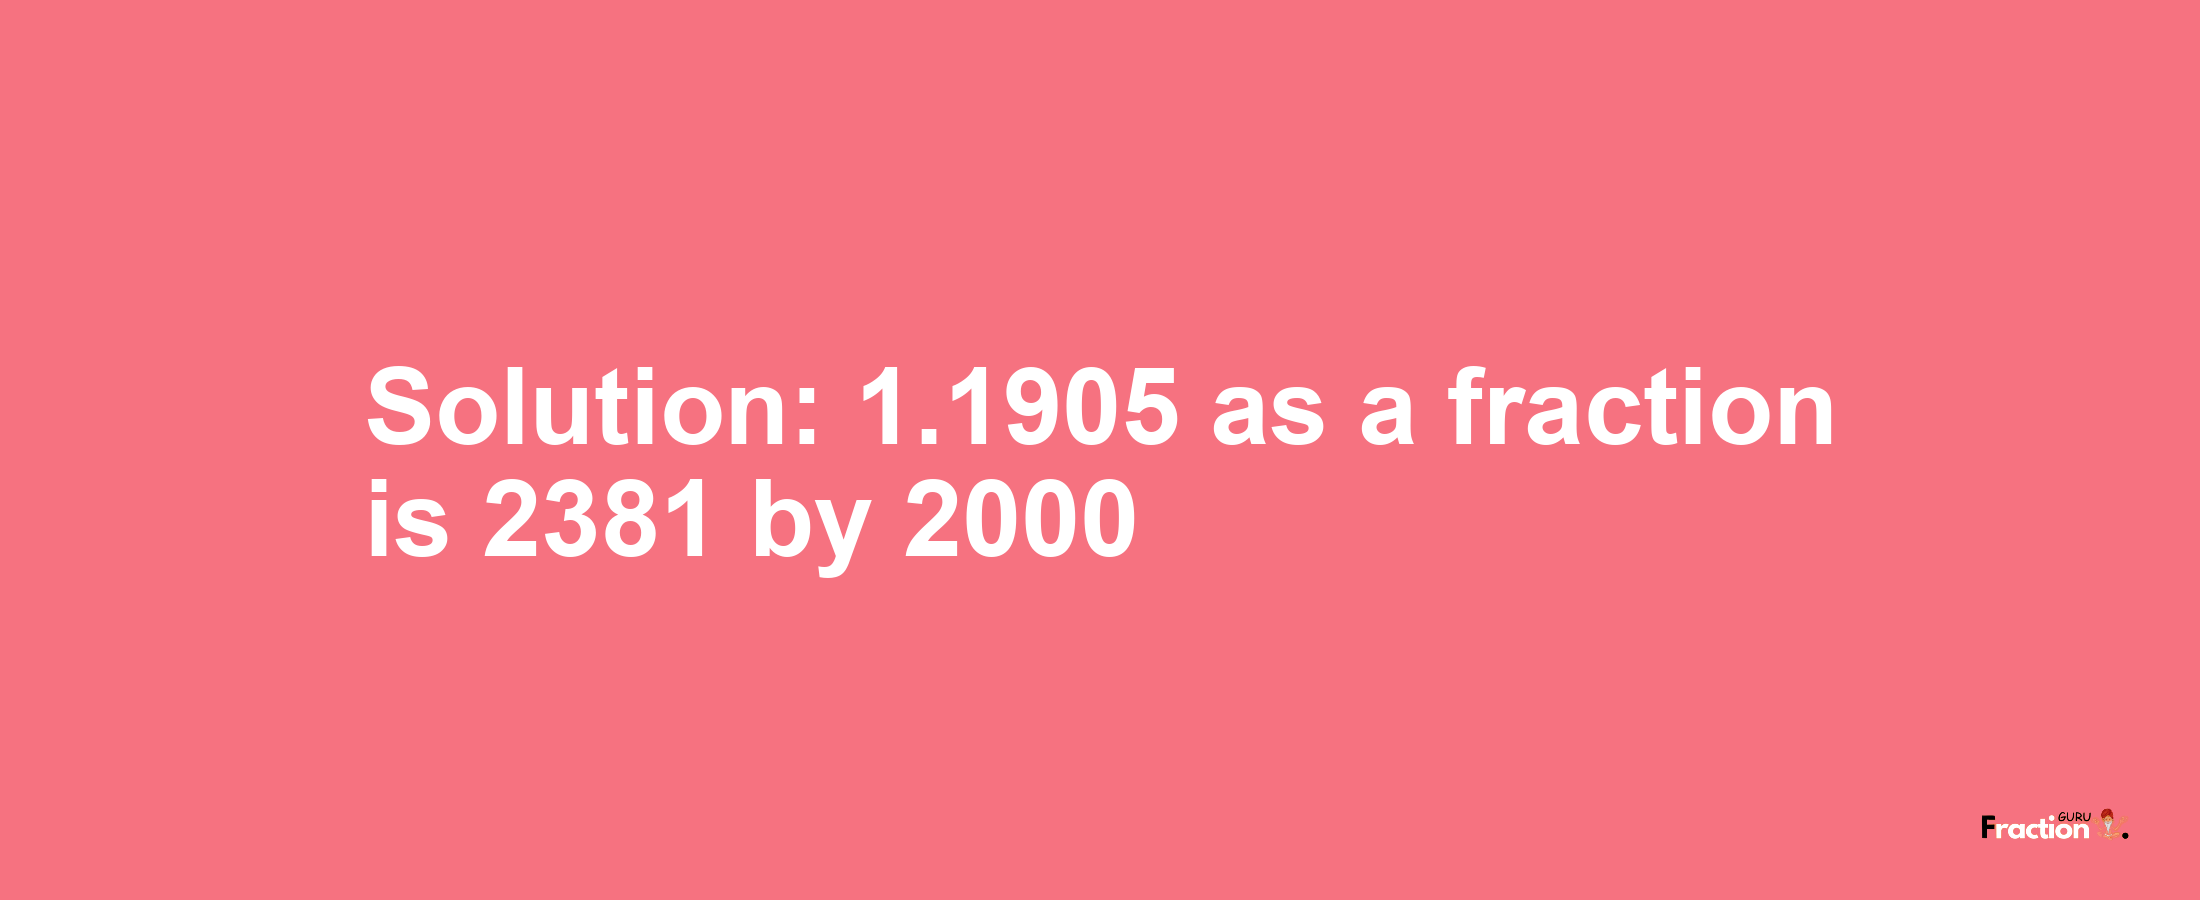 Solution:1.1905 as a fraction is 2381/2000